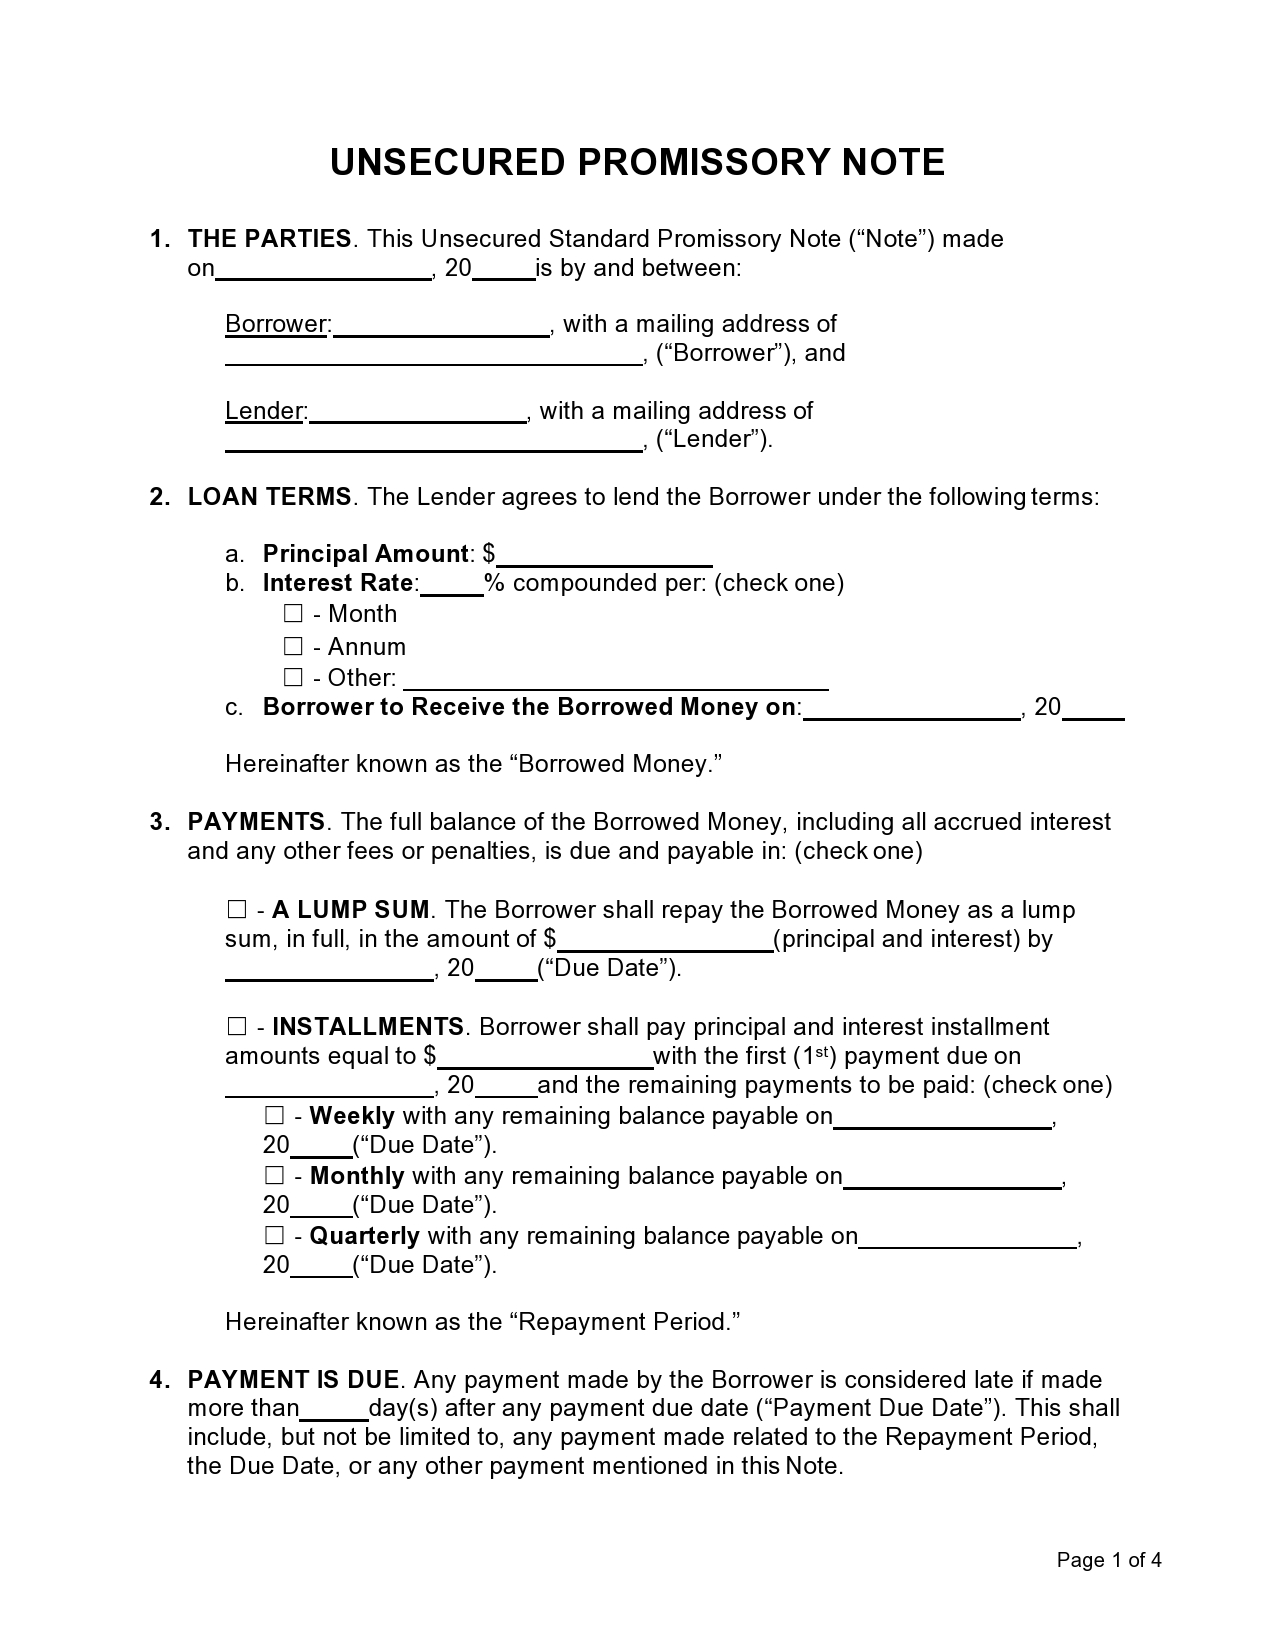 Free promissory note template 02